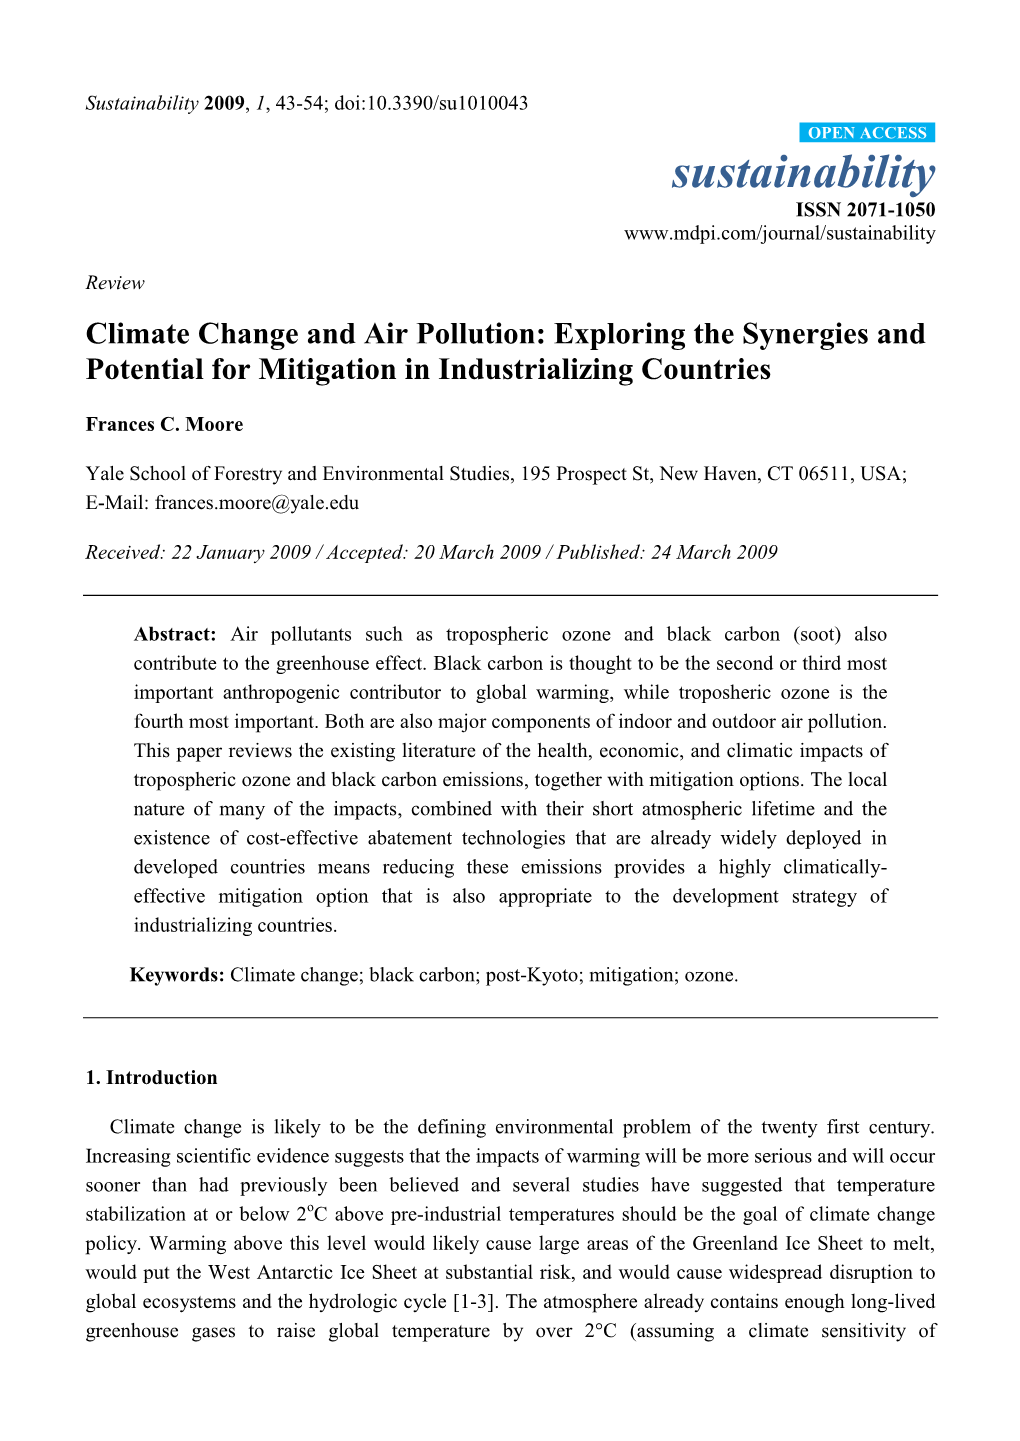 Climate Change and Air Pollution: Exploring the Synergies and Potential for Mitigation in Industrializing Countries